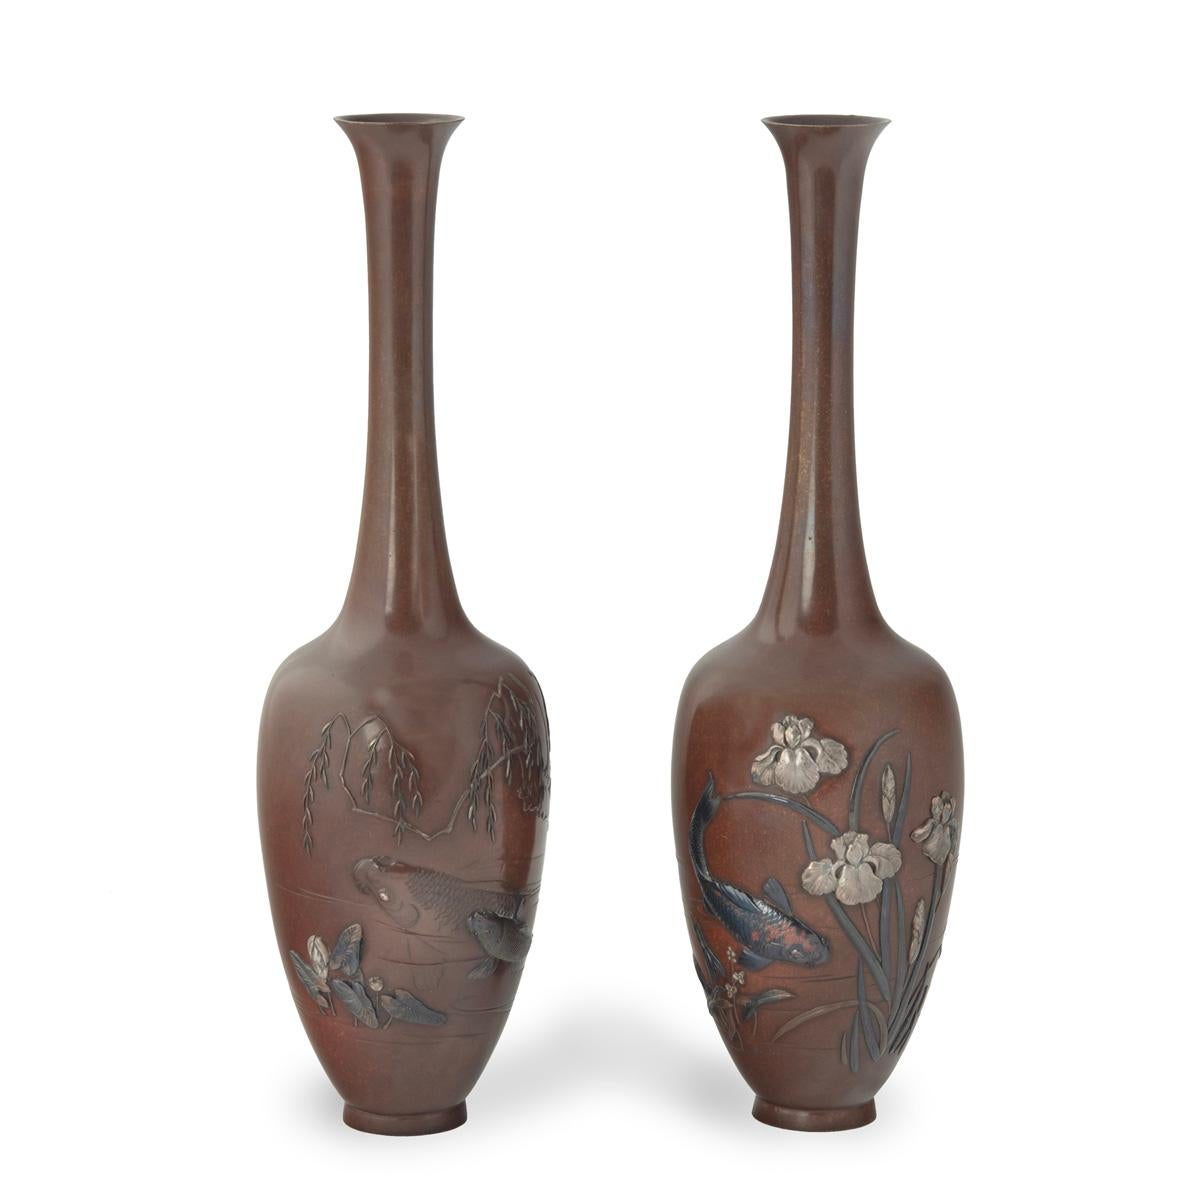 A pair of fine Meiji period bronze vases by Hidenobu, each of slender baluster form with and elongated neck, worked in silver, shakudo and patinated bronze with carp swimming amongst iris plants and trailing willow branches, signed Hidenobu-koku秀延刻.